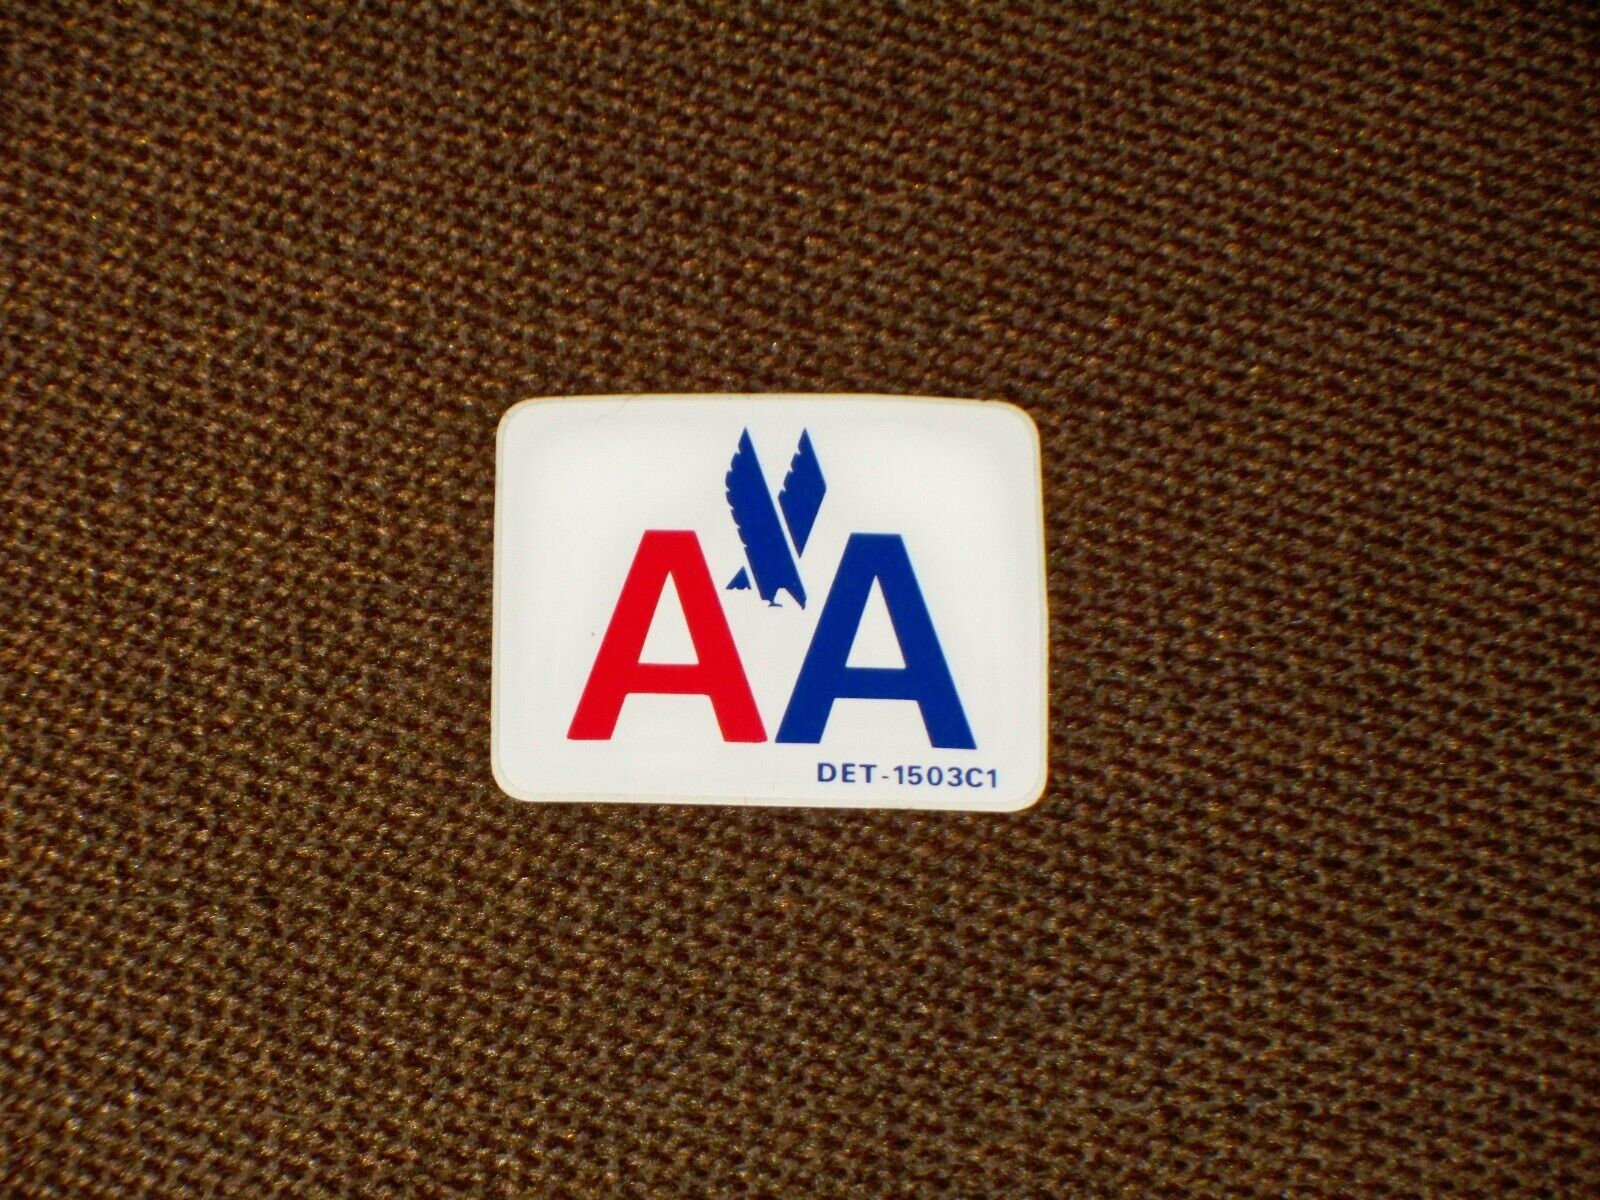 Vintage Vinyl SMALL SIZE American Airlines Old Logo Vinyl Sticker / Decal New